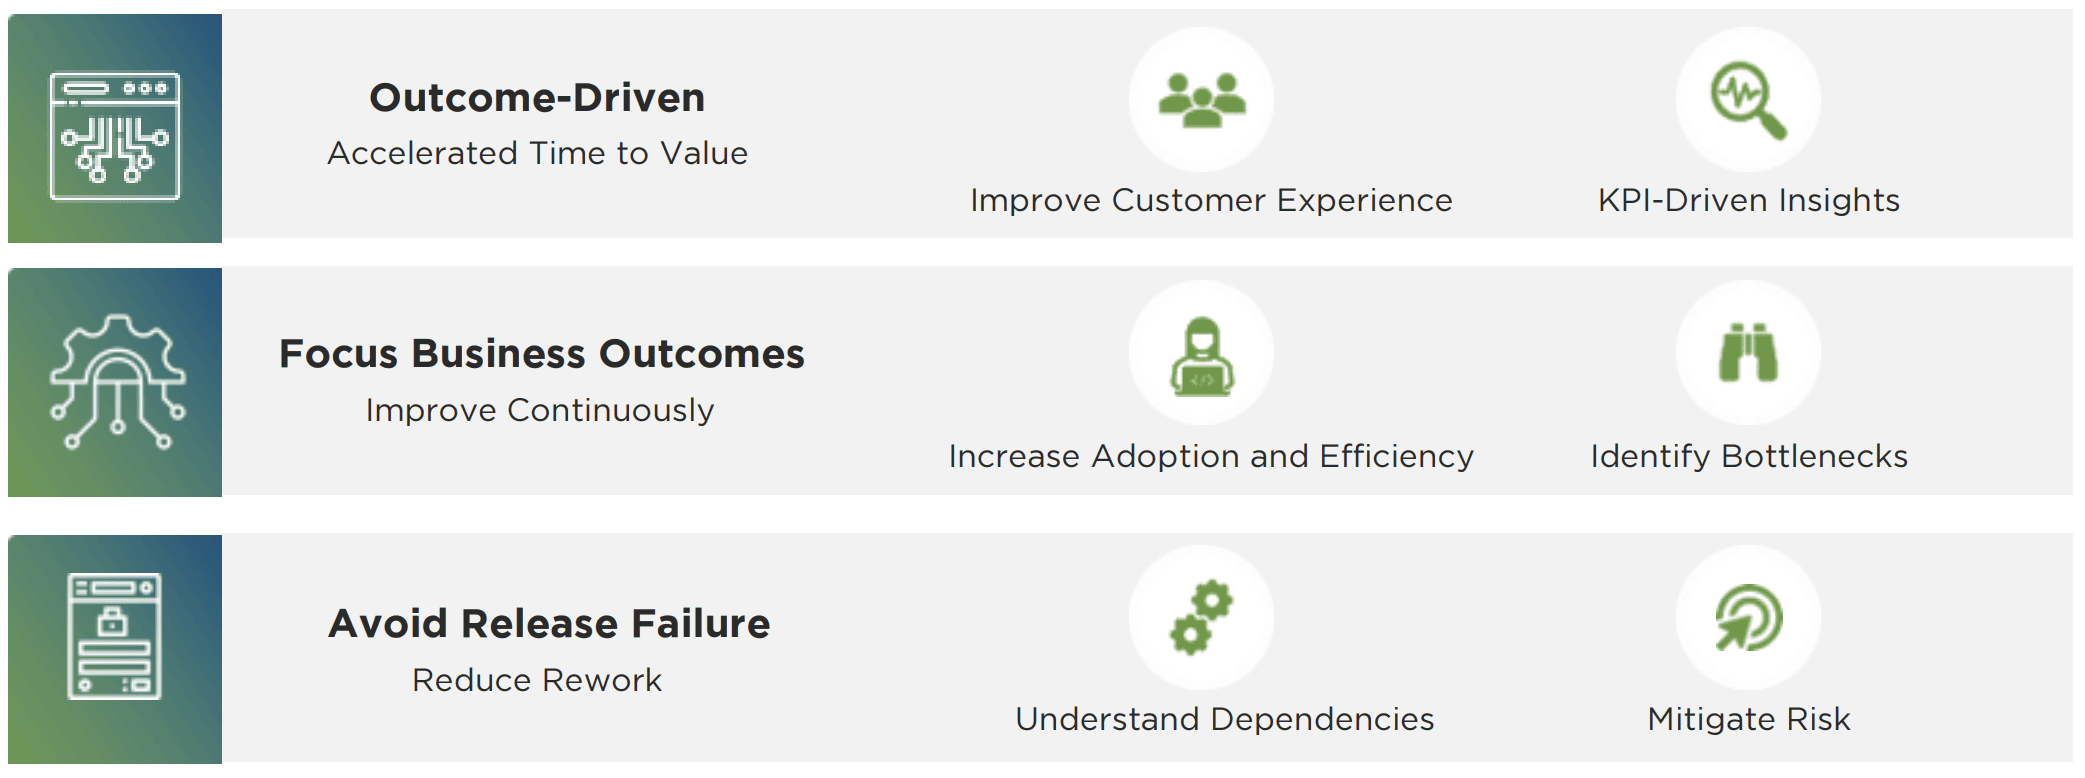 Advanced Capabilities for Agility: 3 Features